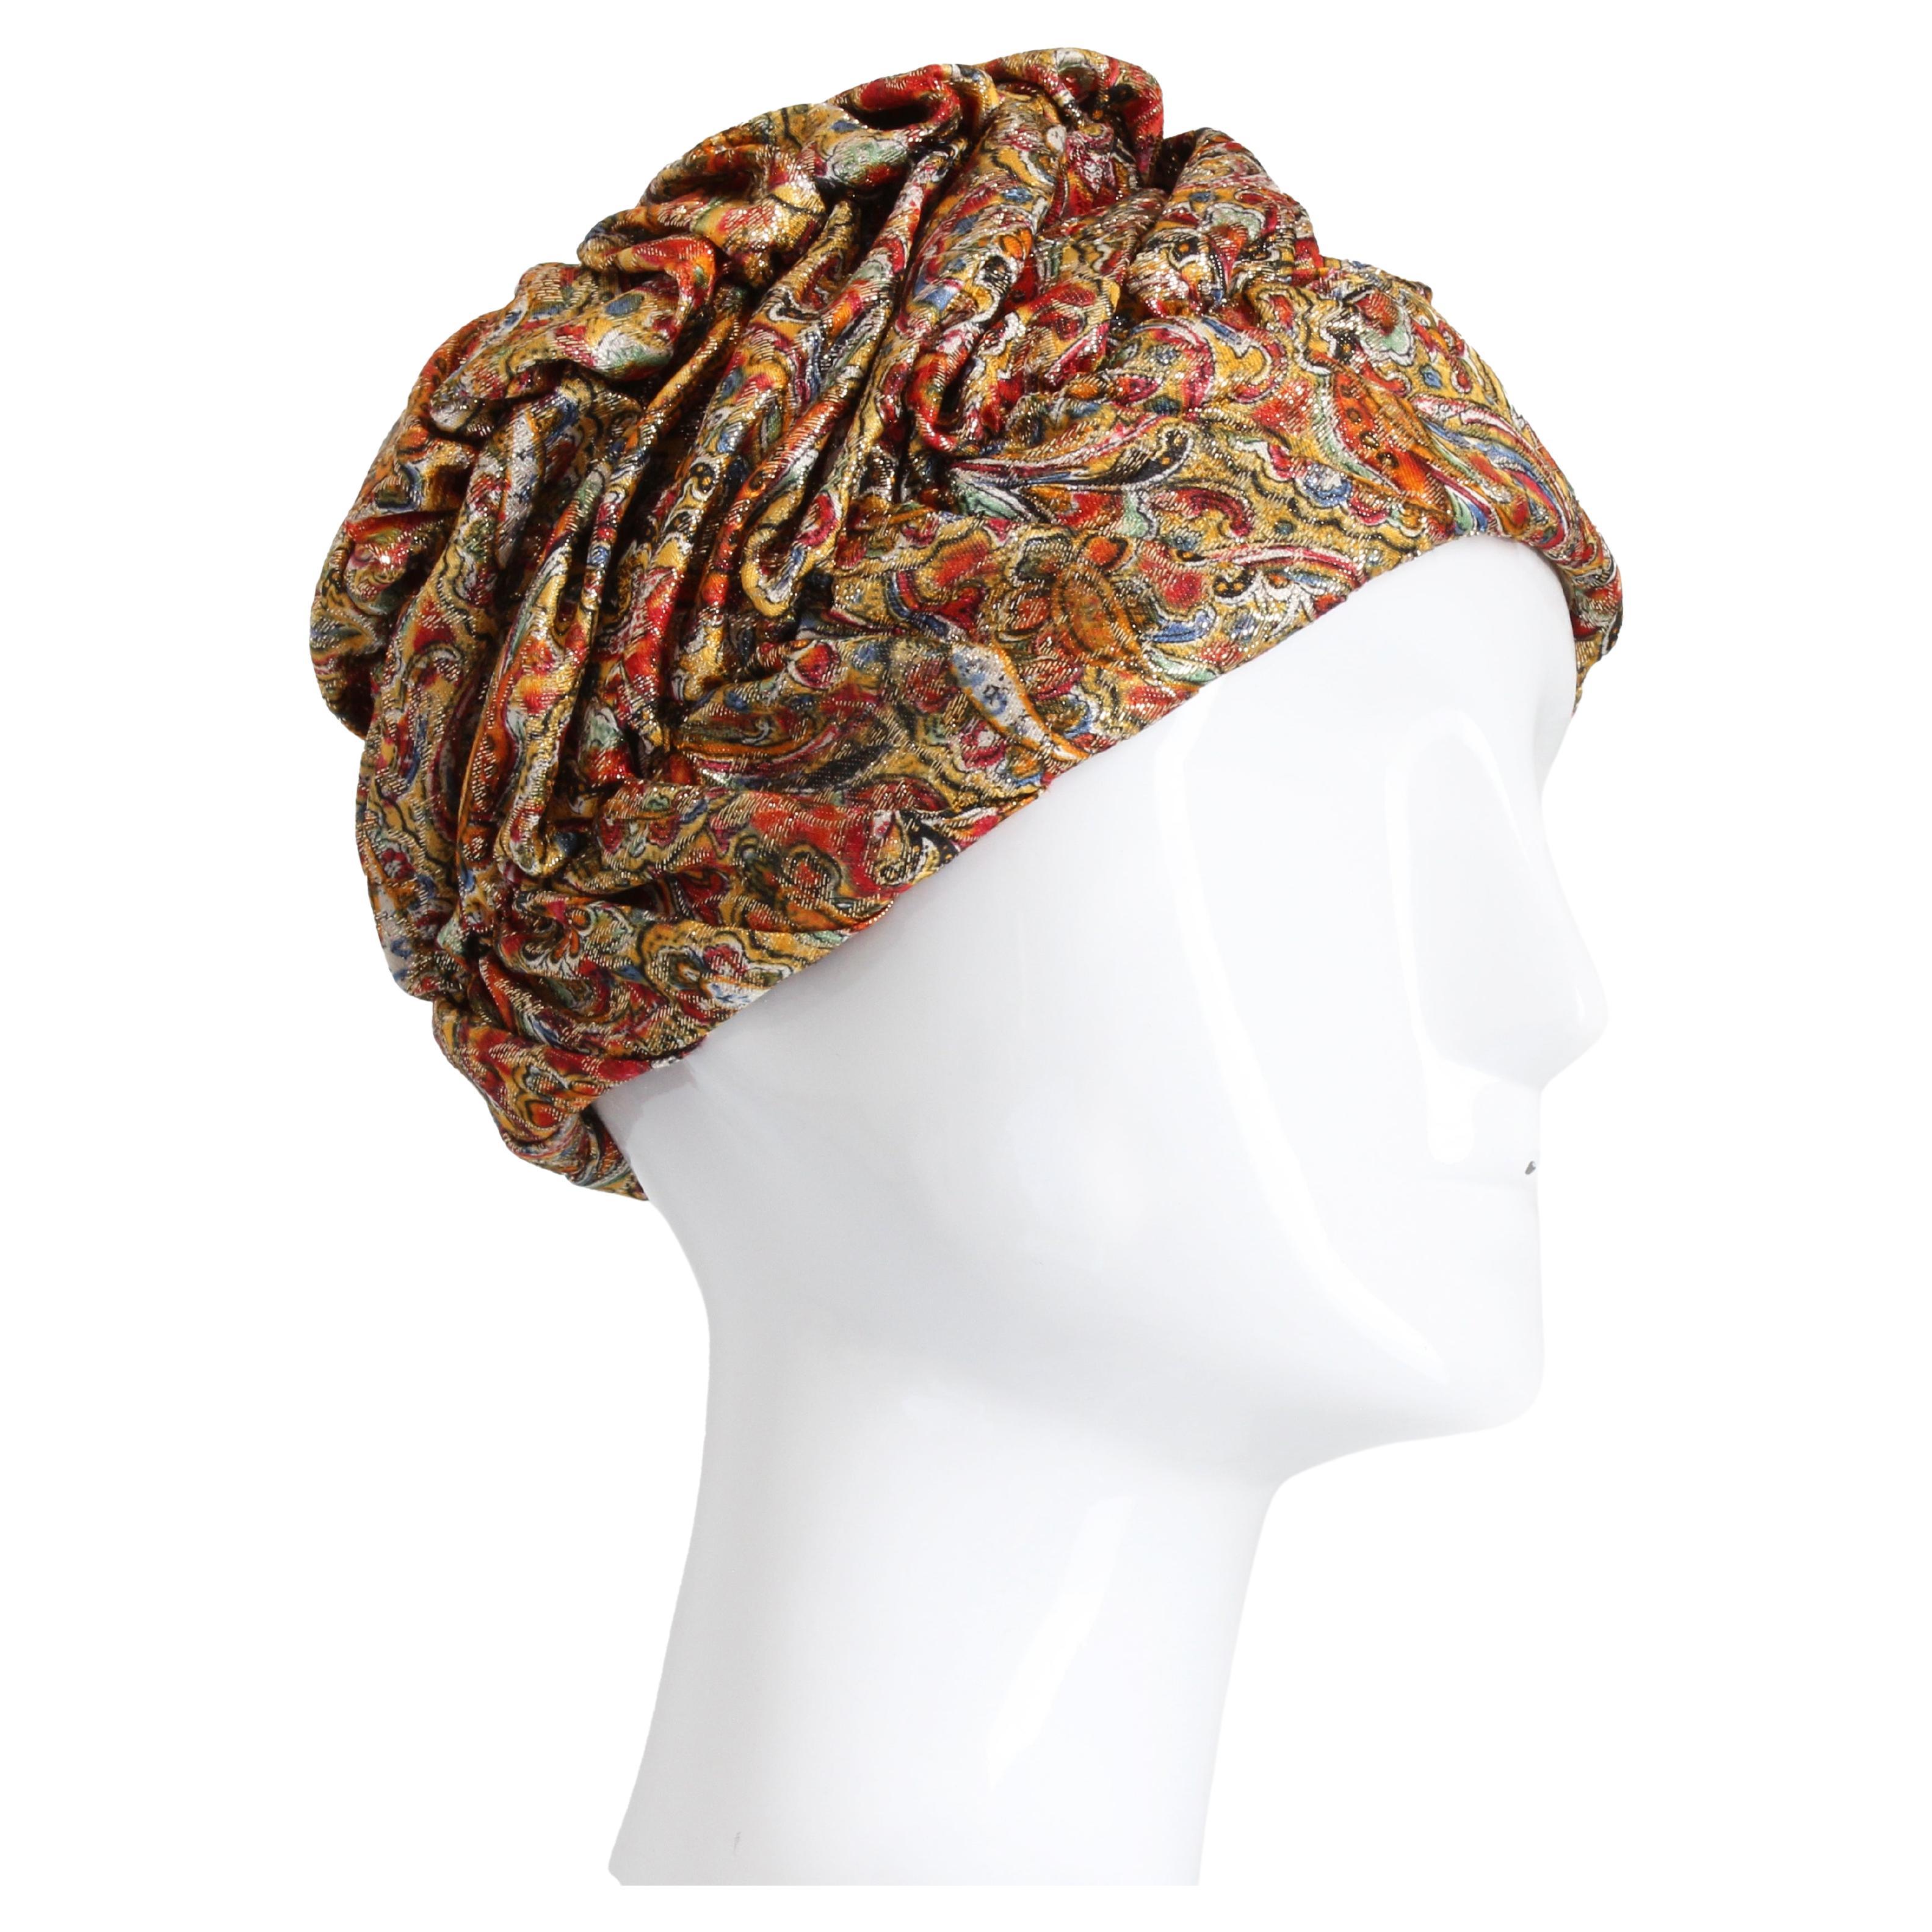 1950s Turban Hat Metallic Paisley Colorful by Marshall Field & Company Rare  For Sale